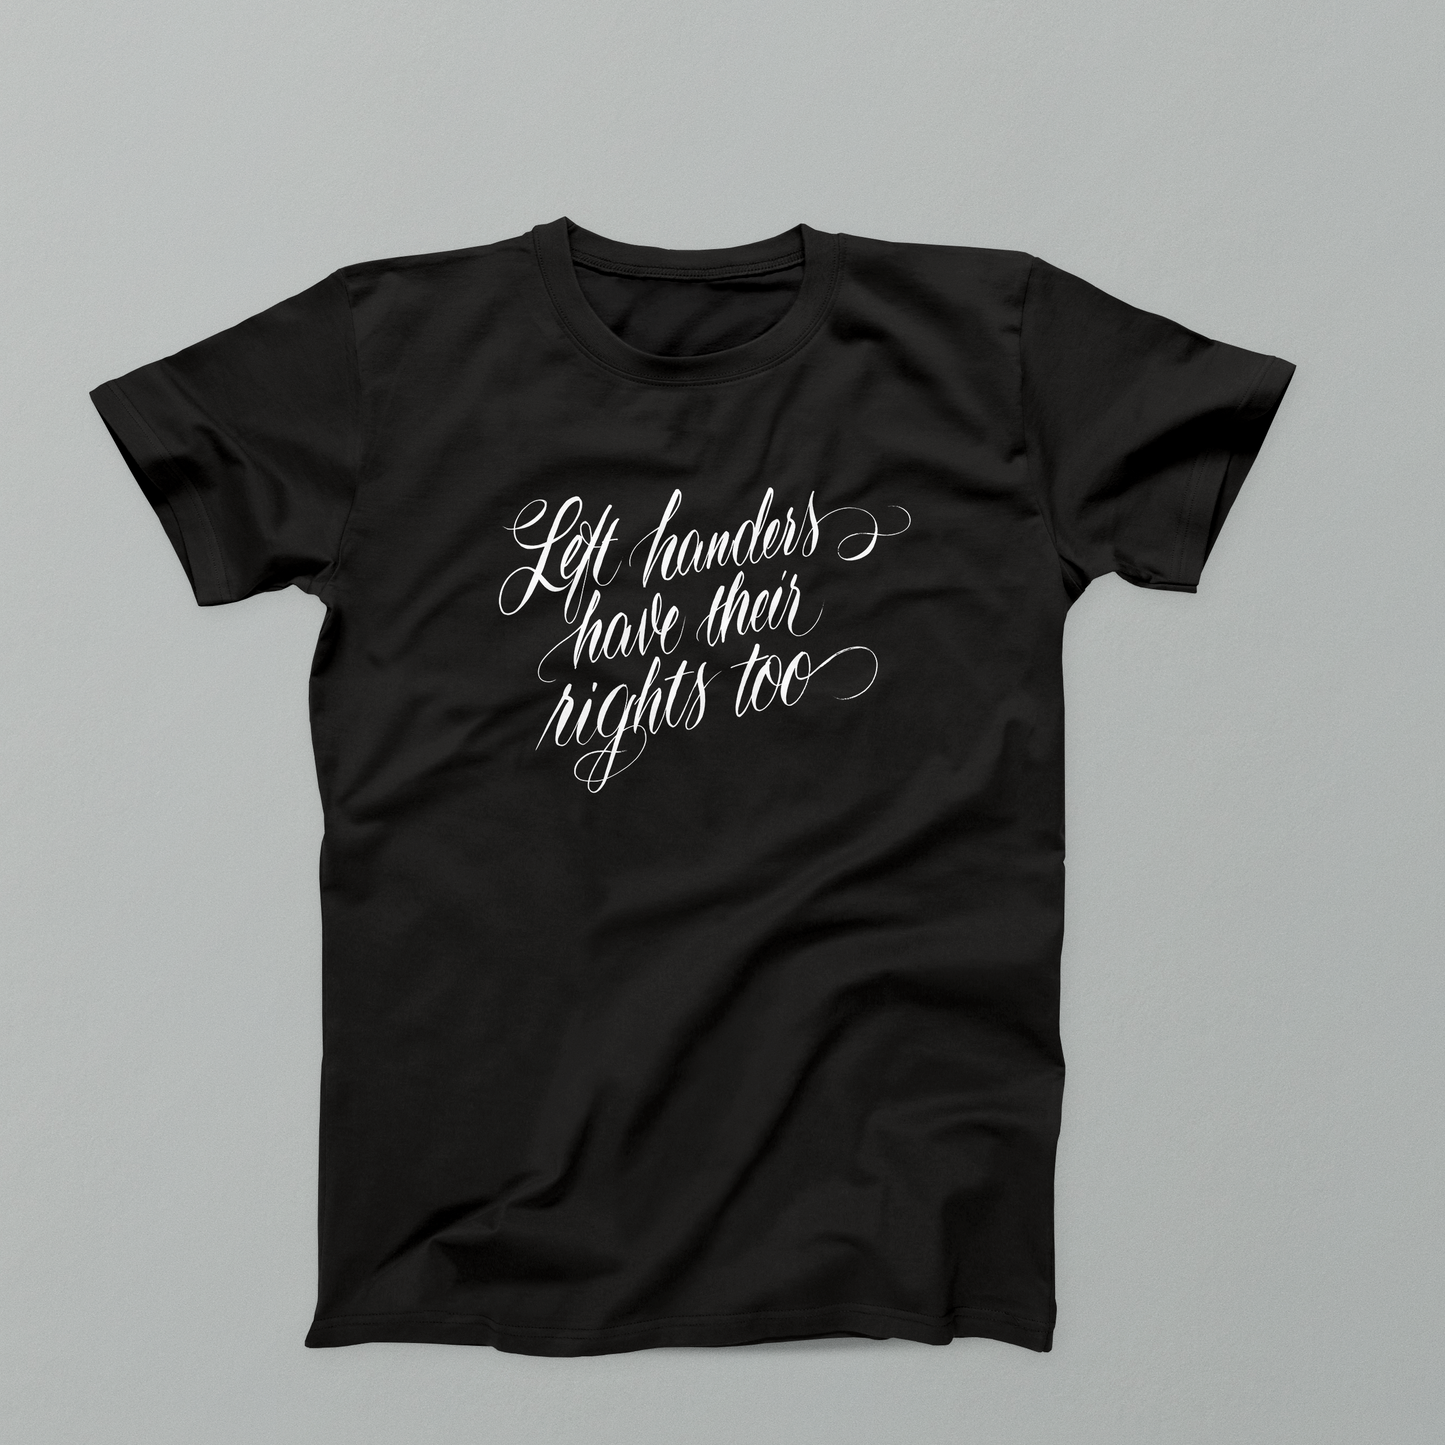 Left Handers Have Their Rights Too T-Shirt